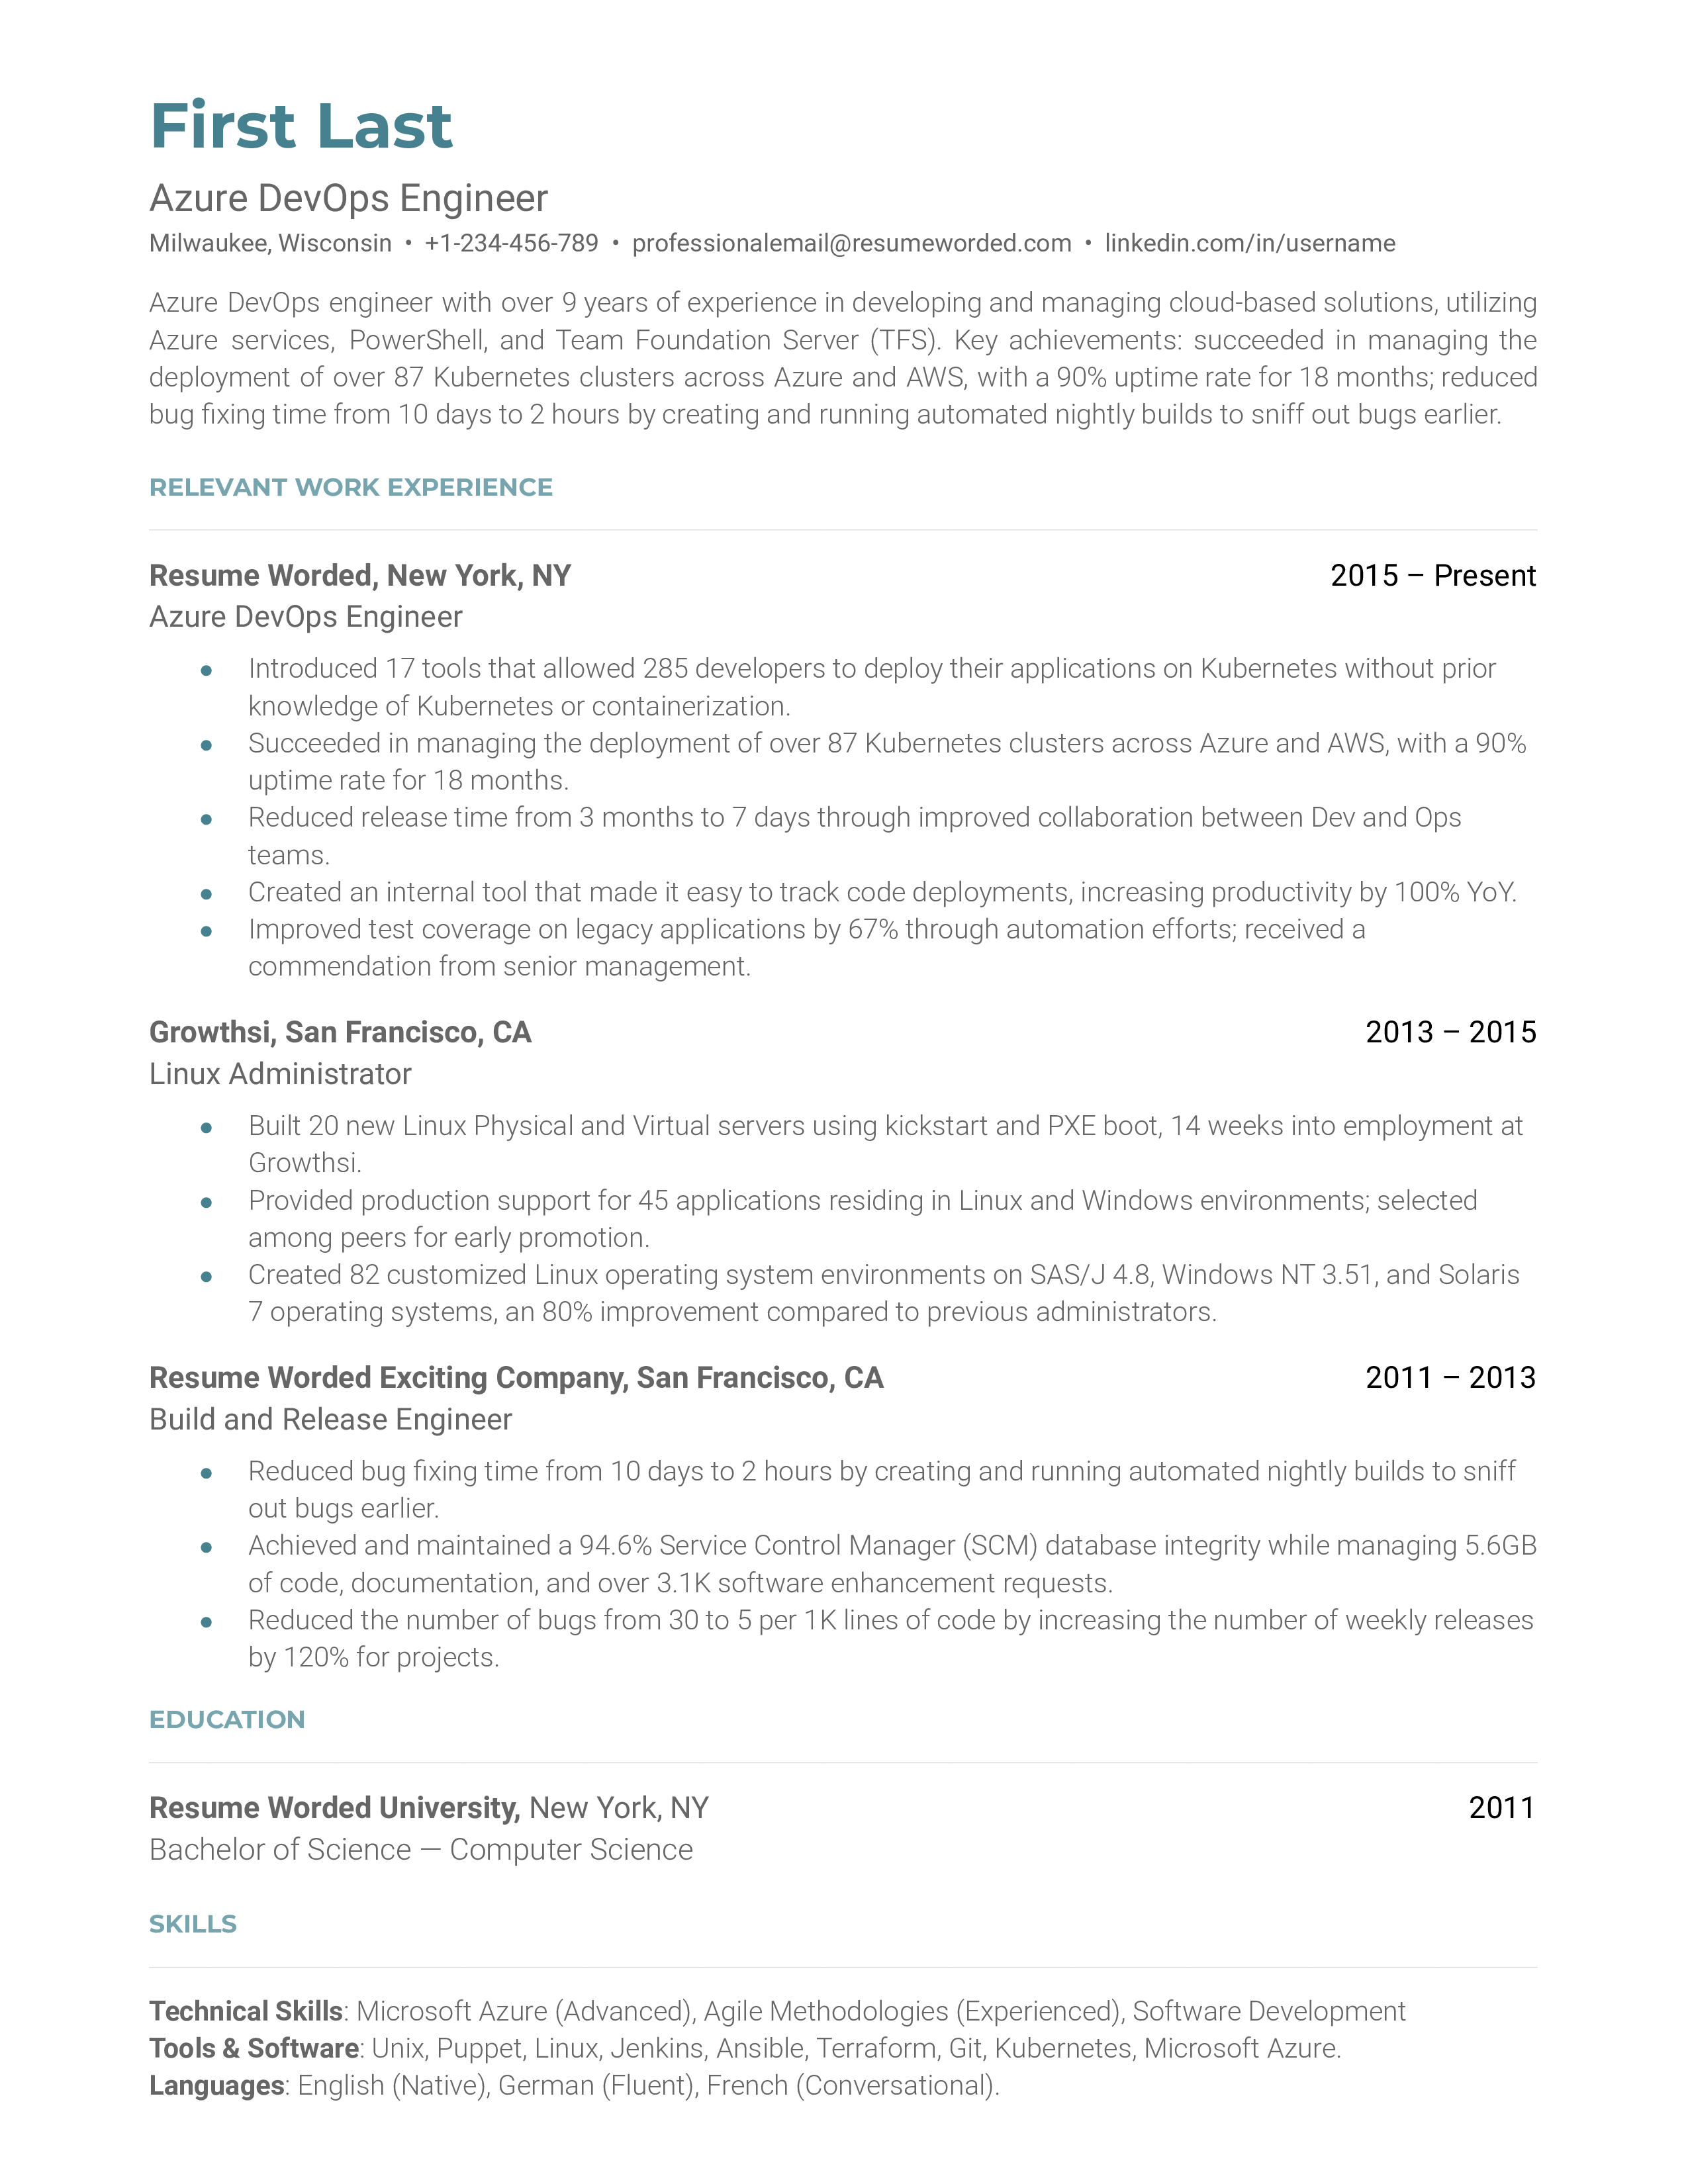 An Azure DevOps engineer resume sample that highlights the applicant’s Azure qualifications and impressive metrics.